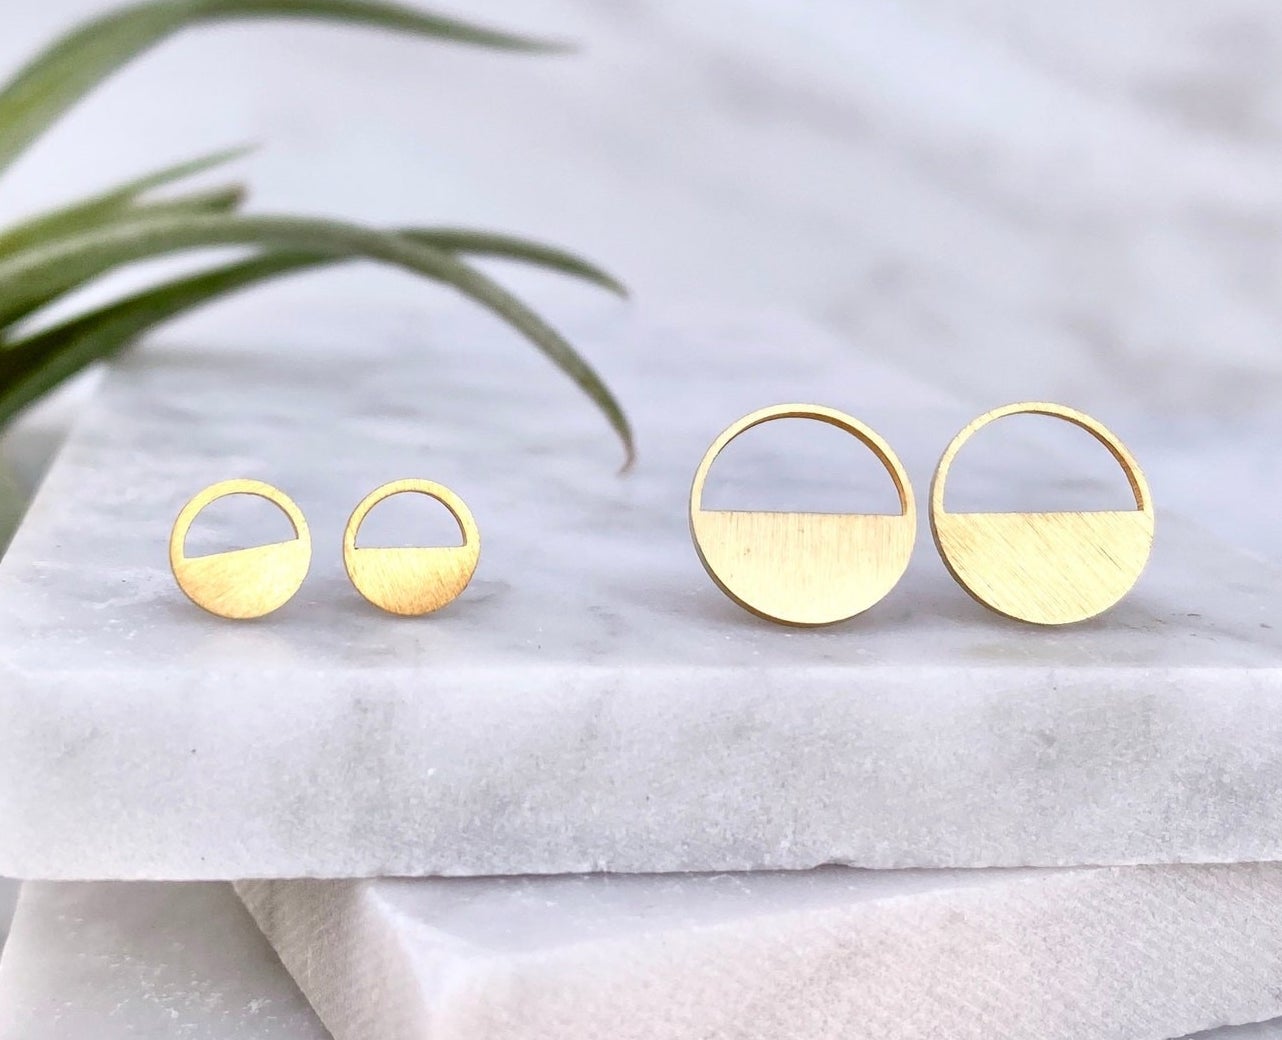 A pair of small and large half-circle stud earrings.